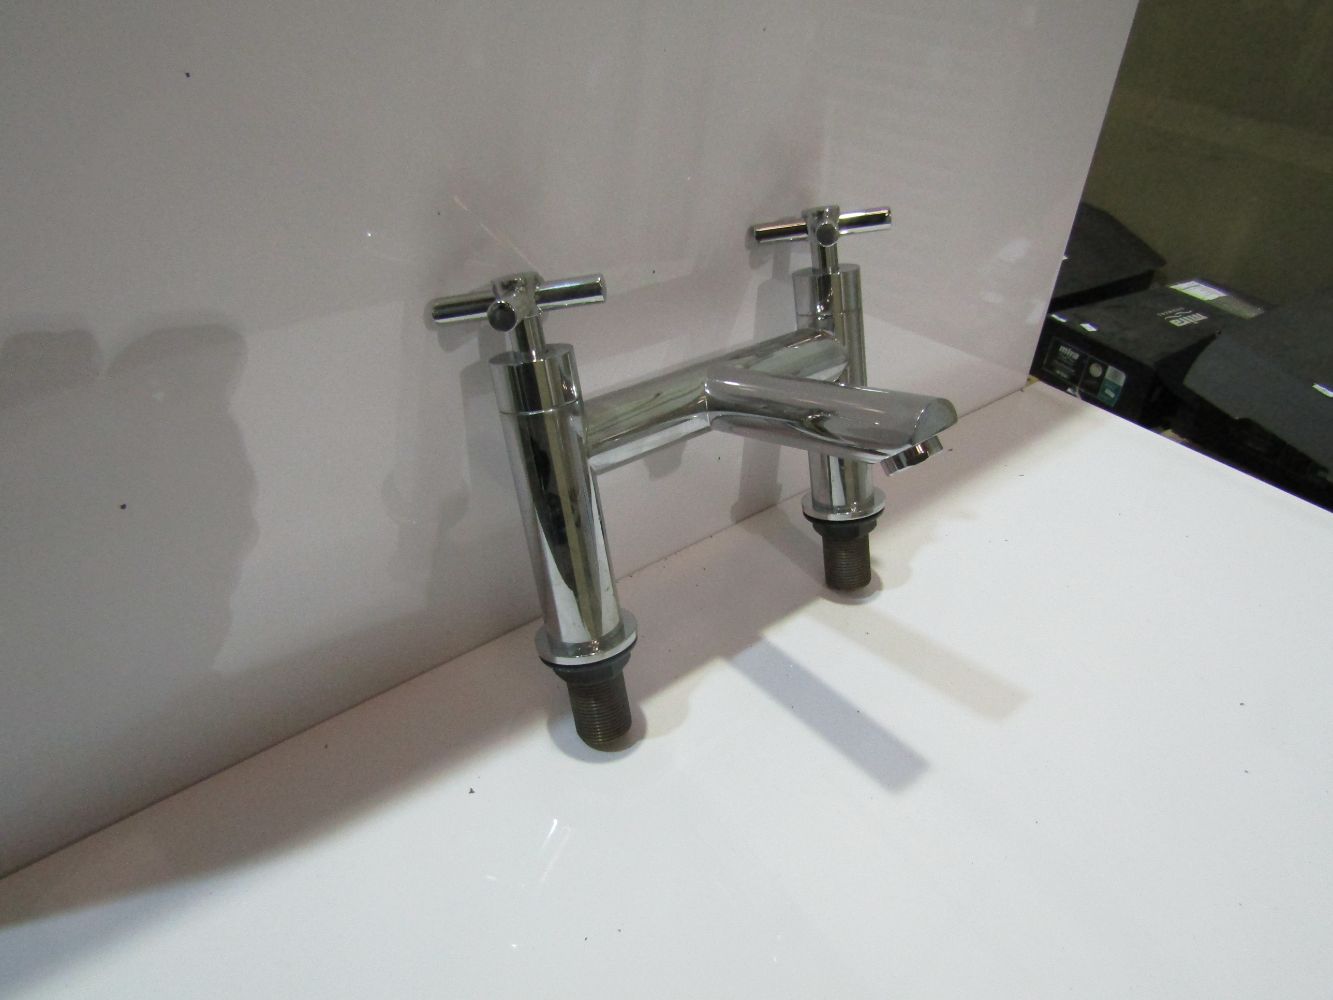 Bathroom - Bath Fillers / Taps / Bulky Pallet Lots And Much More!!